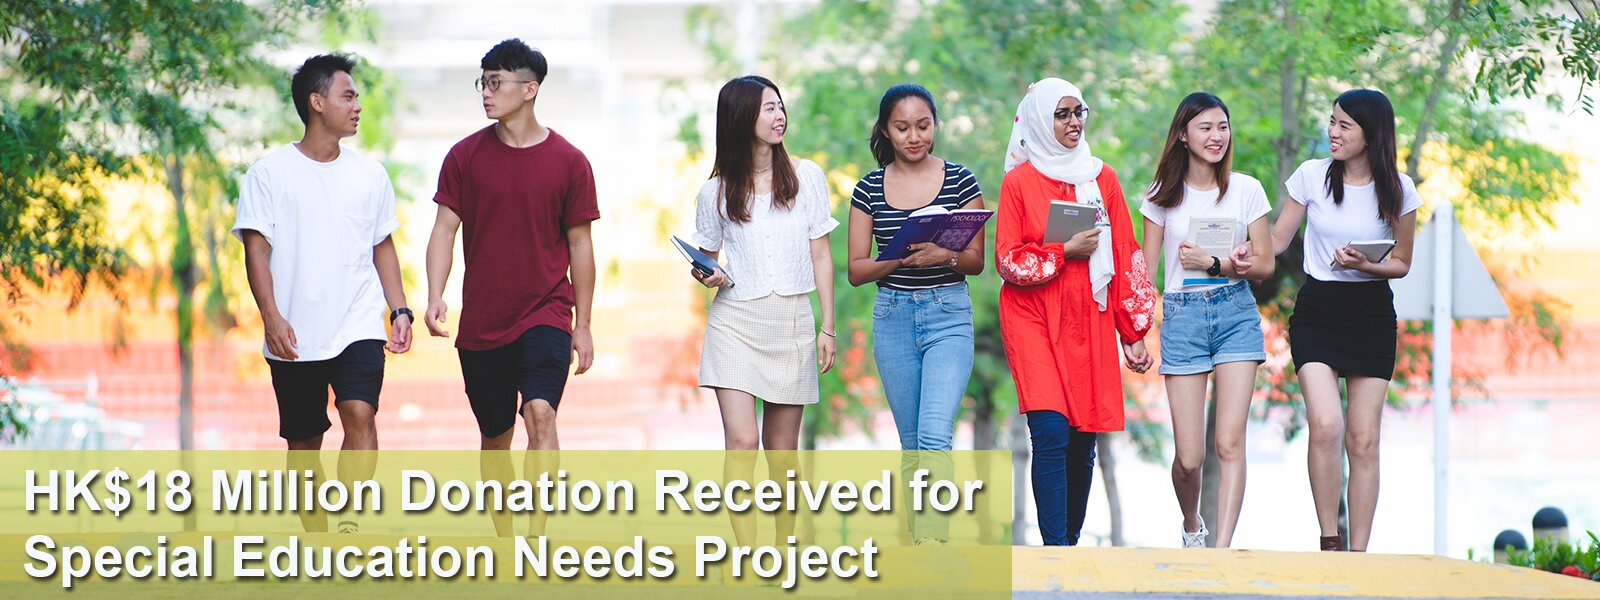 HK$18 Million Donation Received for Special Education Needs Project